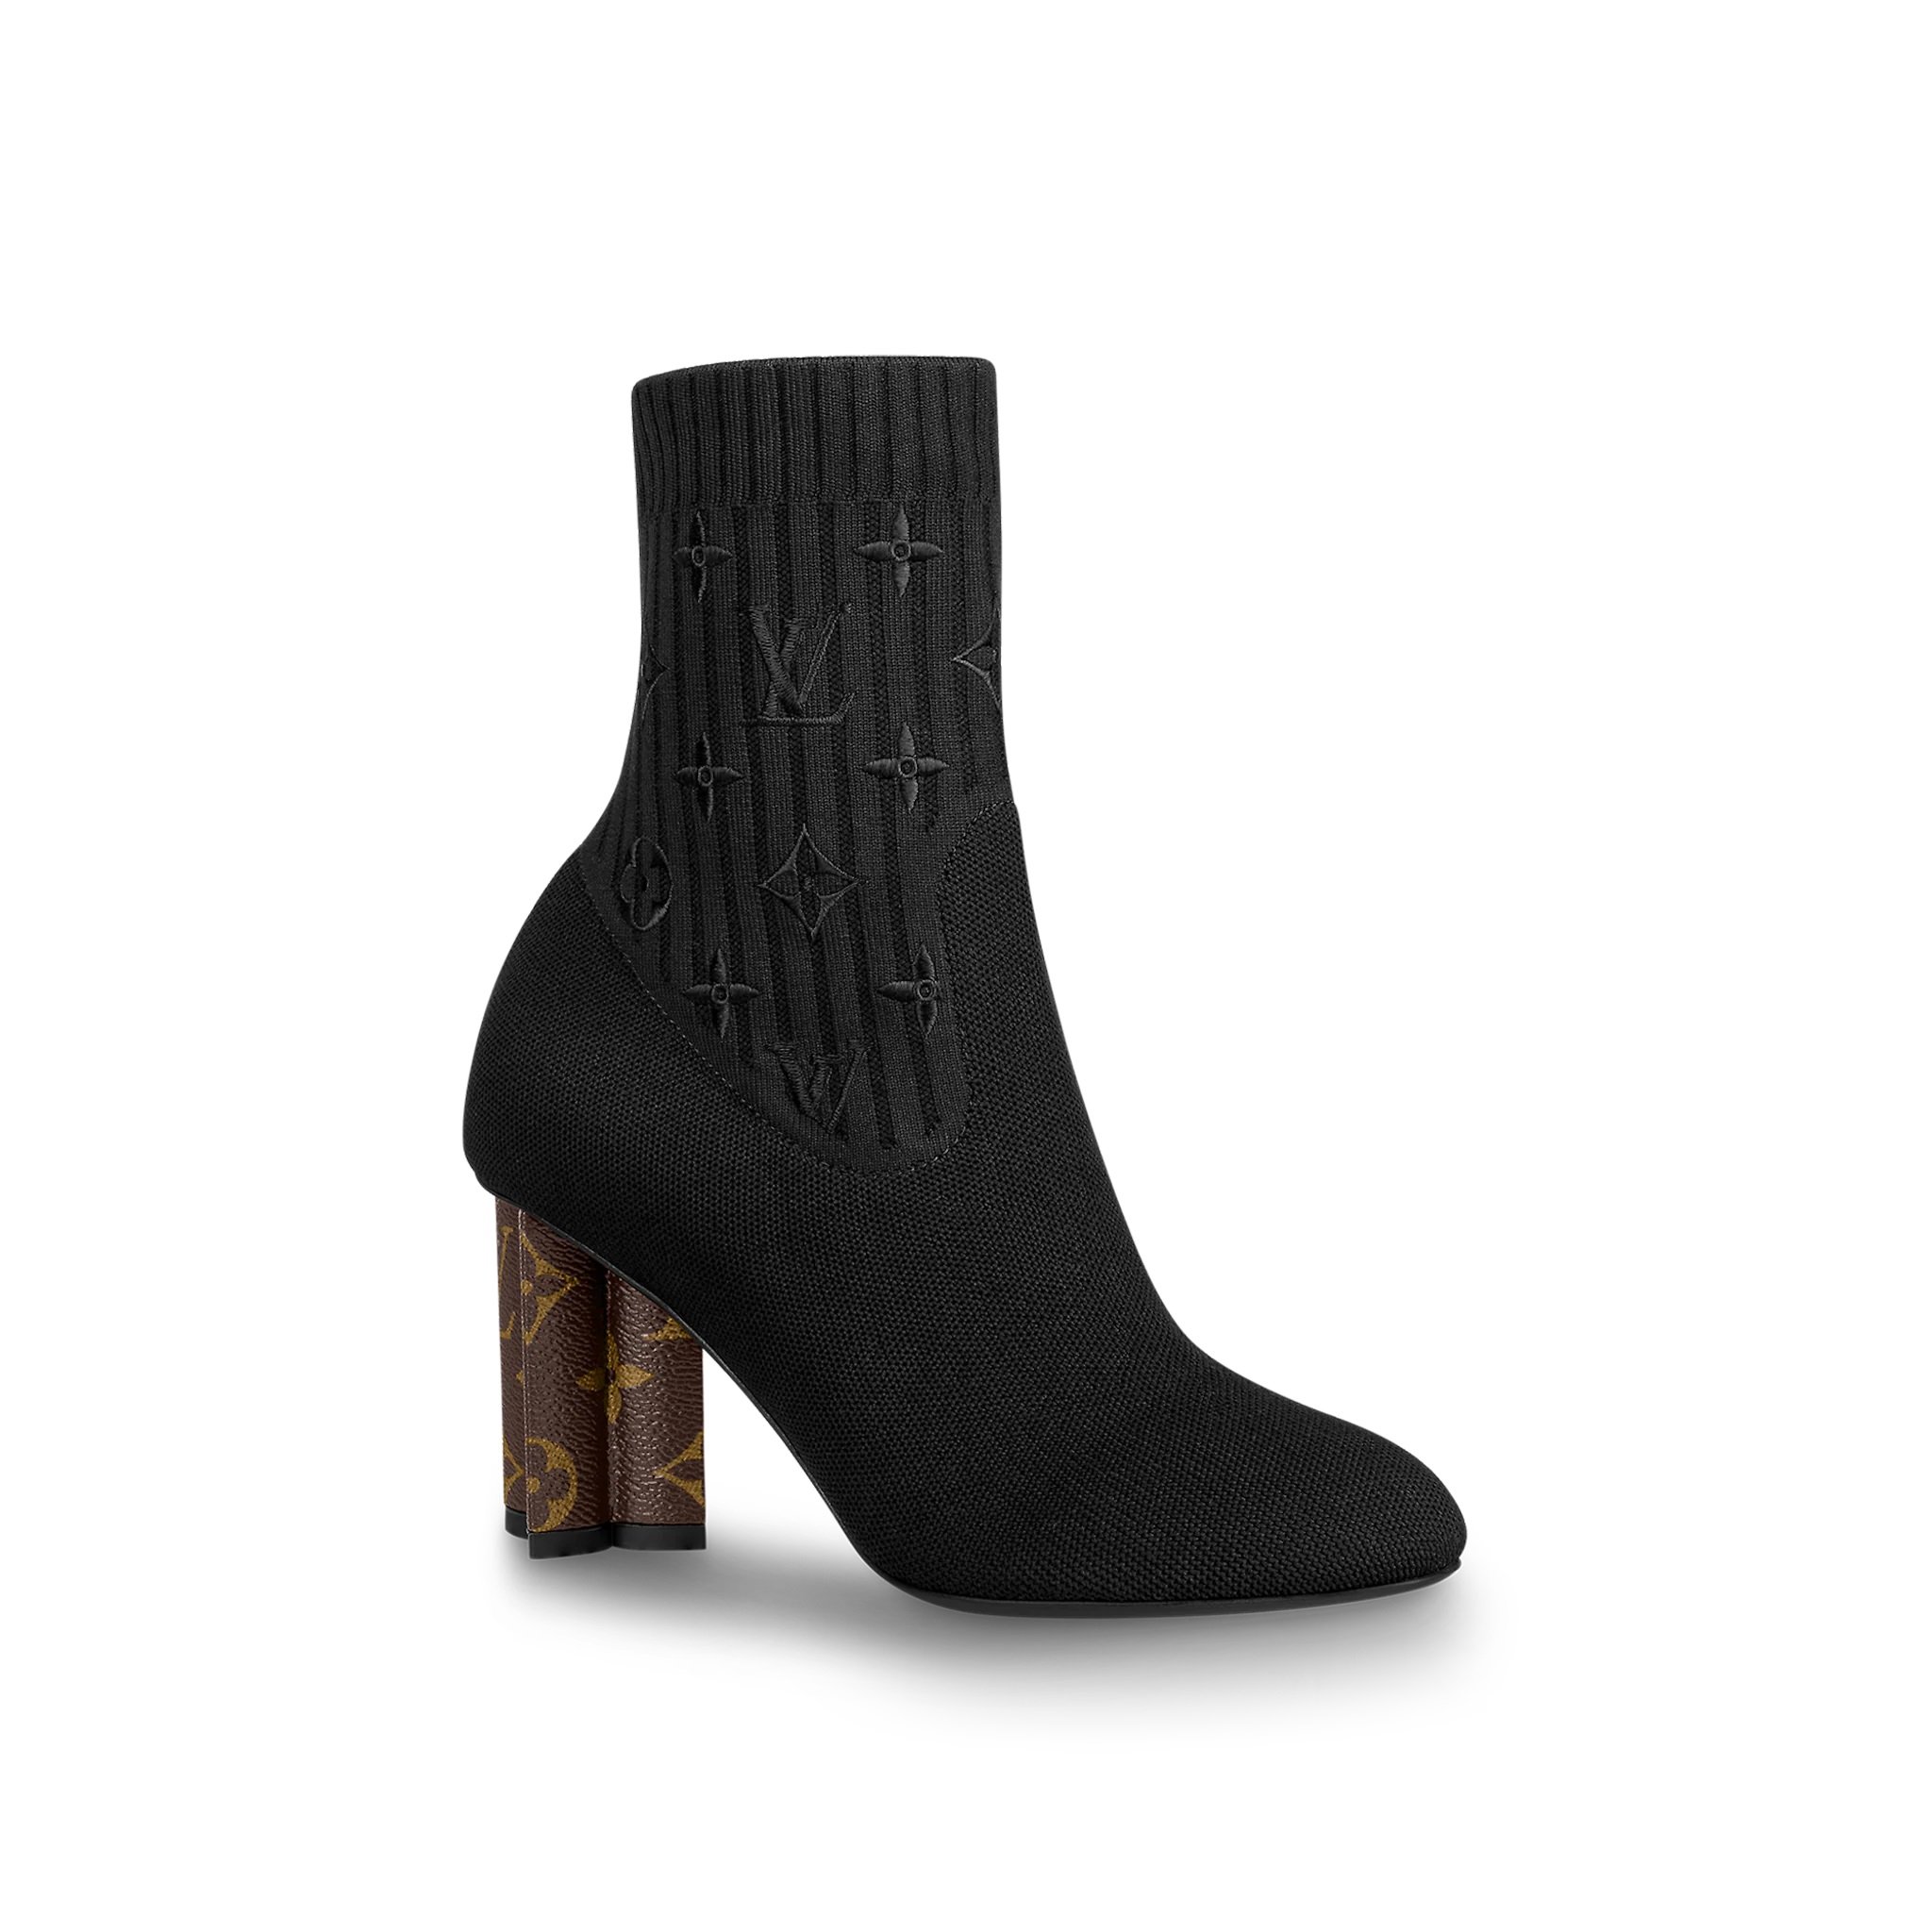 Louis Vuitton Silhouette Ankle Boots in Black.jpg